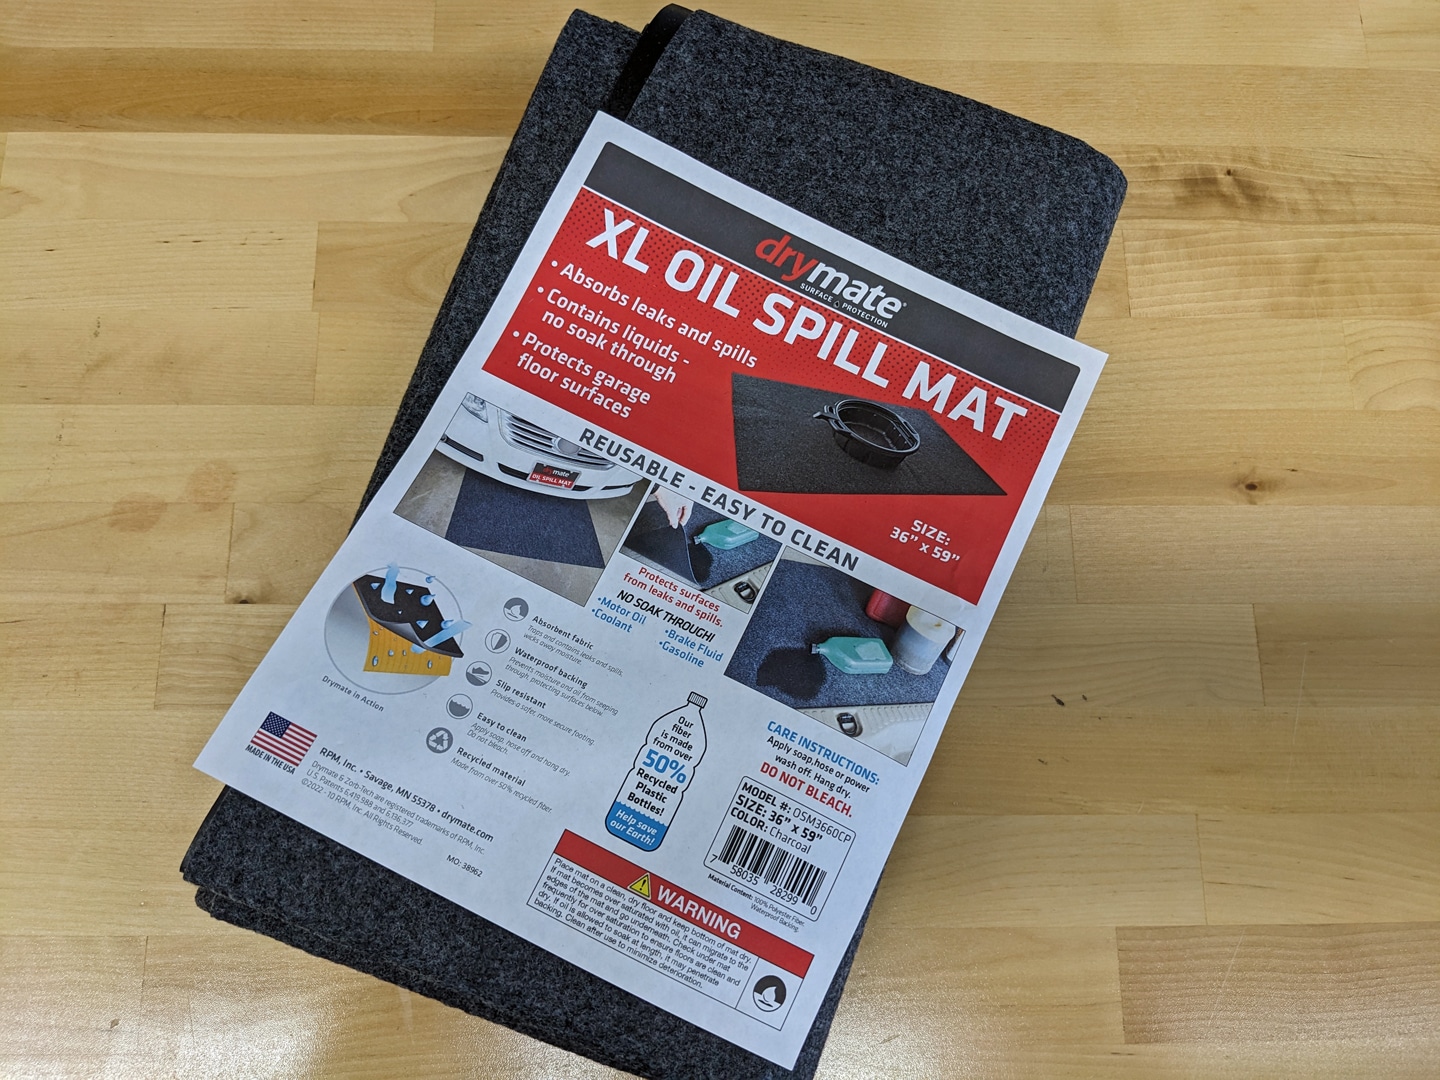 Drymate Oil Spill Mat: overview and review